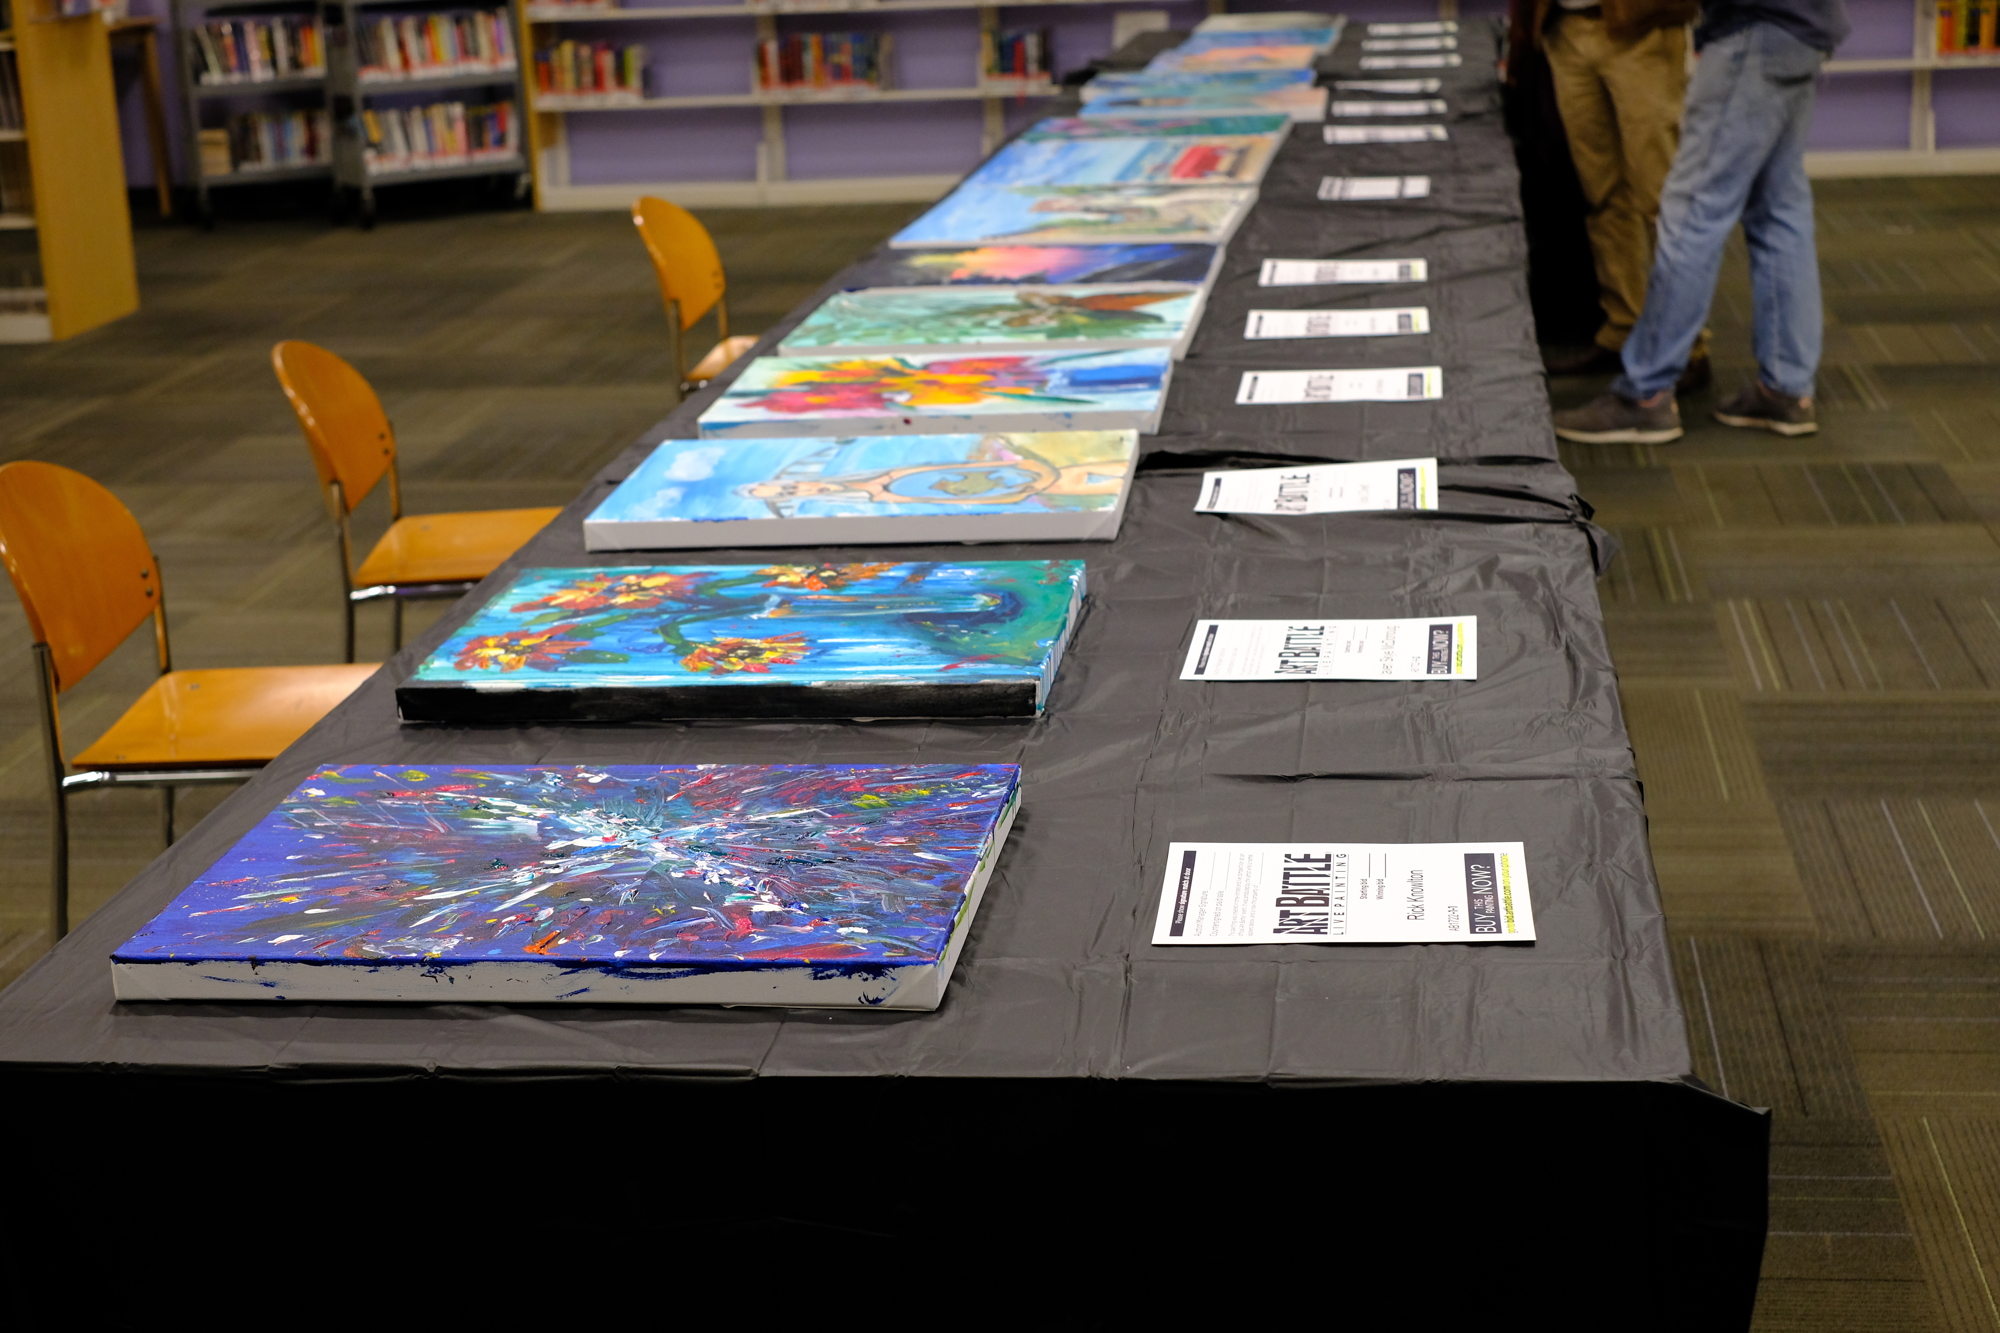 After the battle is over, a silent auction is held for the paintings, with the money going to the artists.